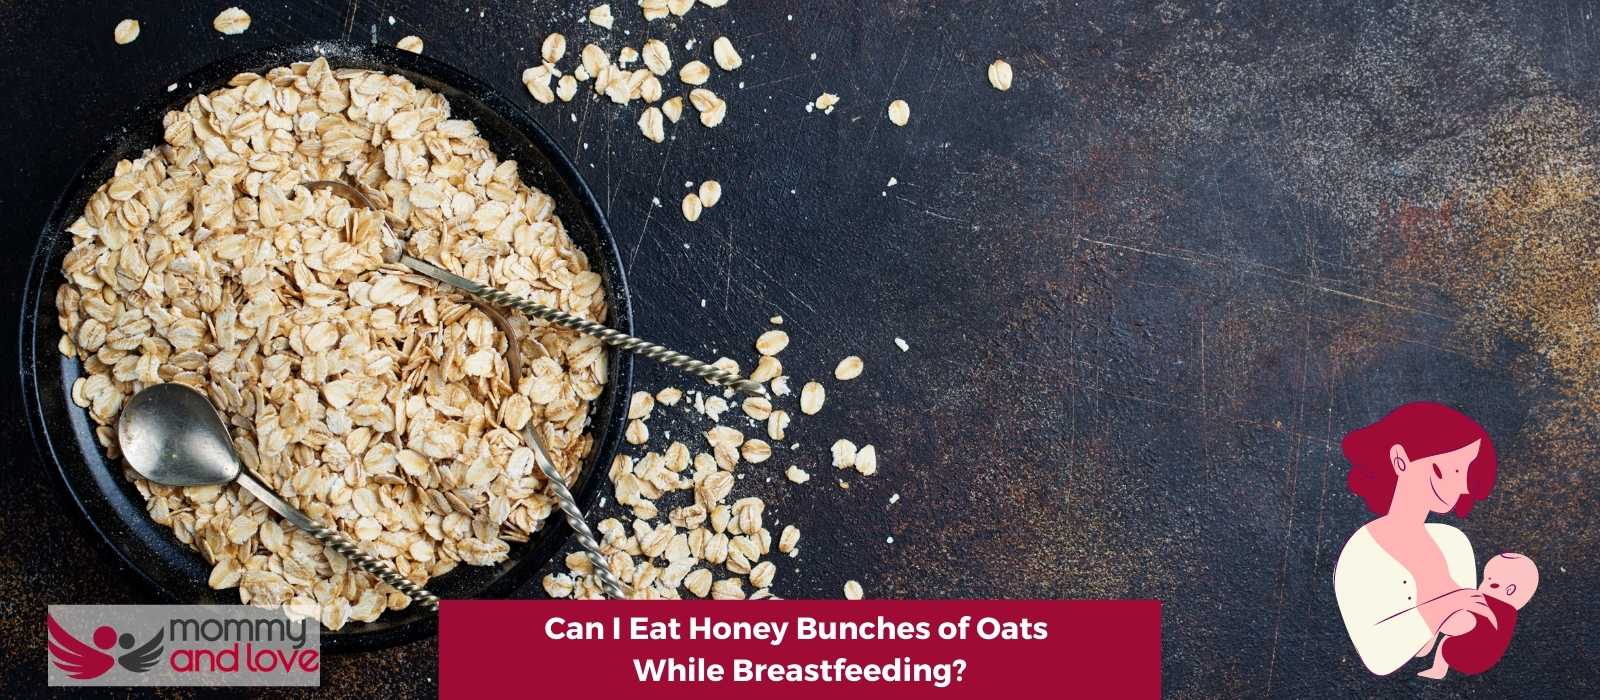 Can I Eat Honey Bunches of Oats While Breastfeeding?